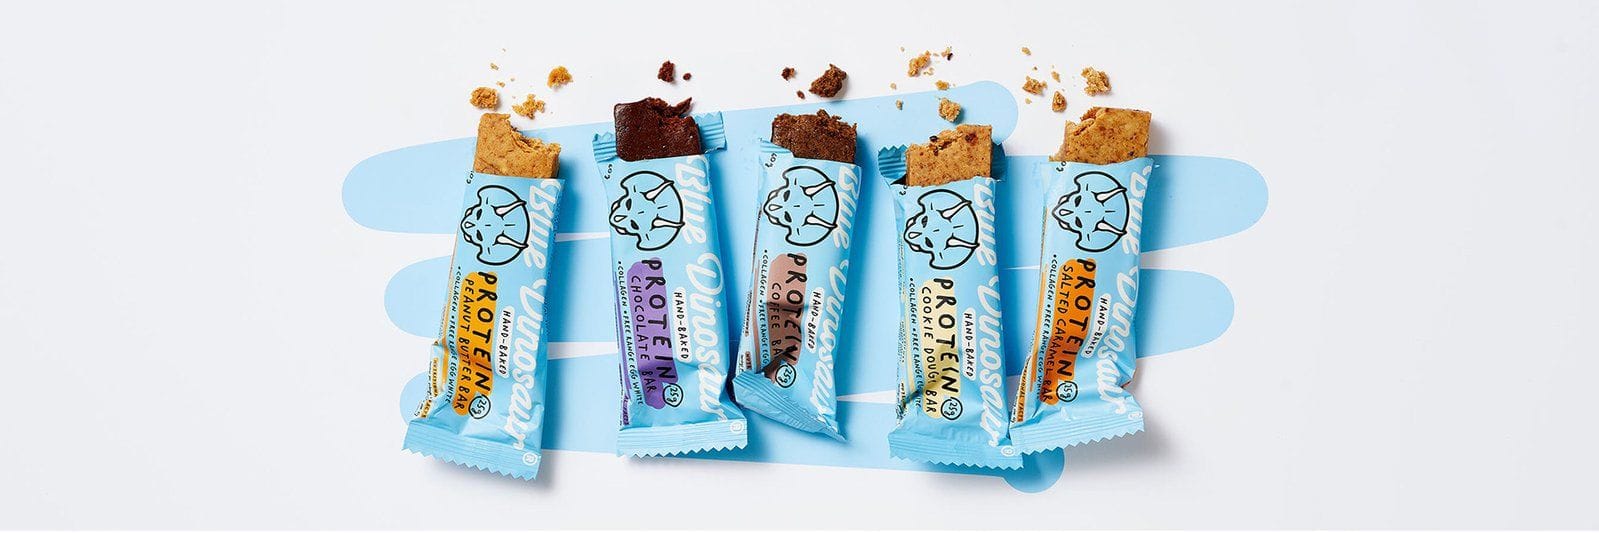 Forbidden Foods bags plant-based snacking company Blue Dinosaur for $4m